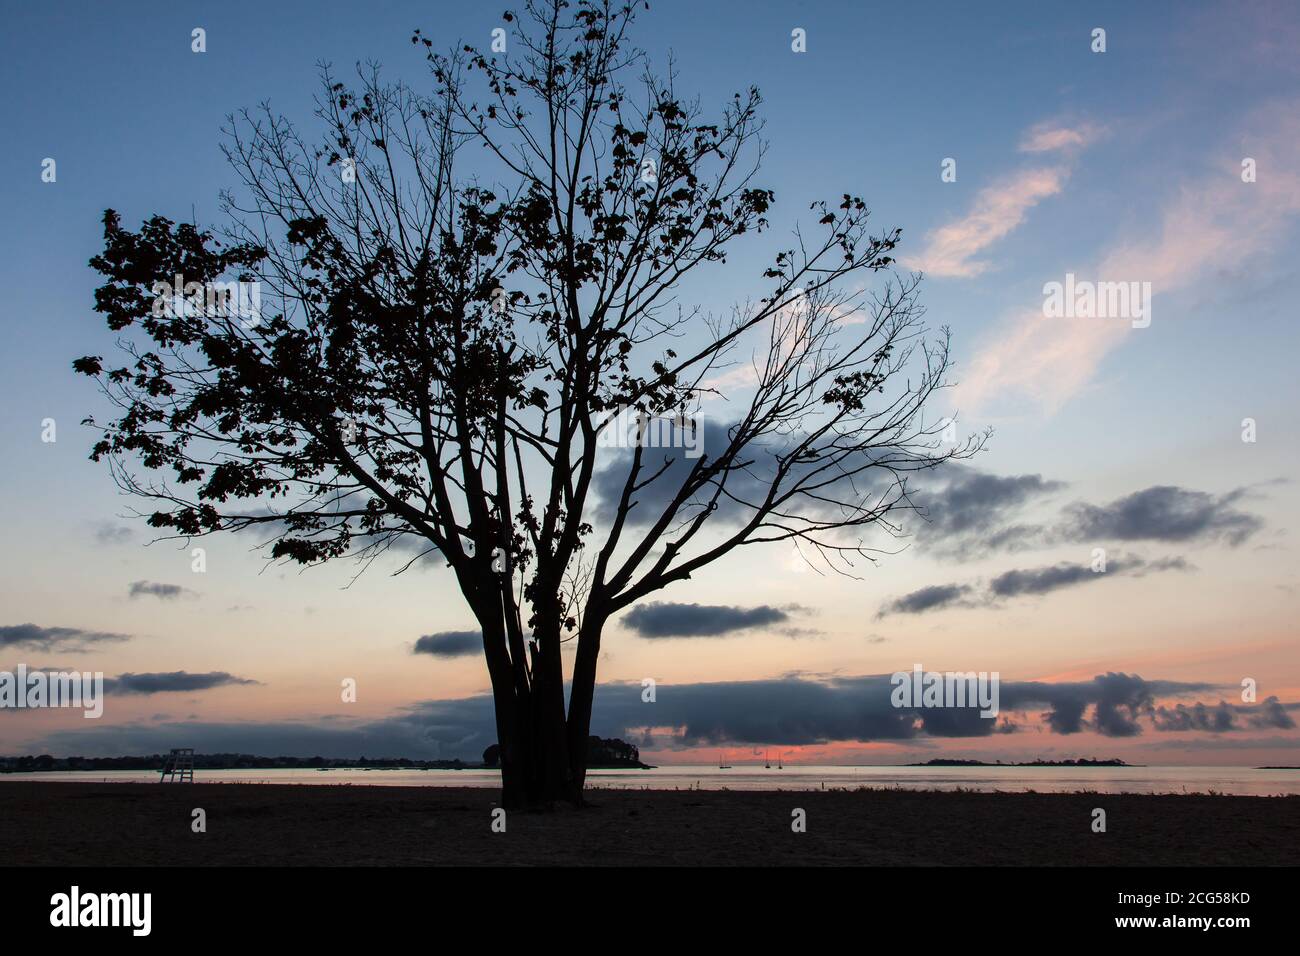 Tree silhouette from beach with nice morning colors on sky Stock Photo